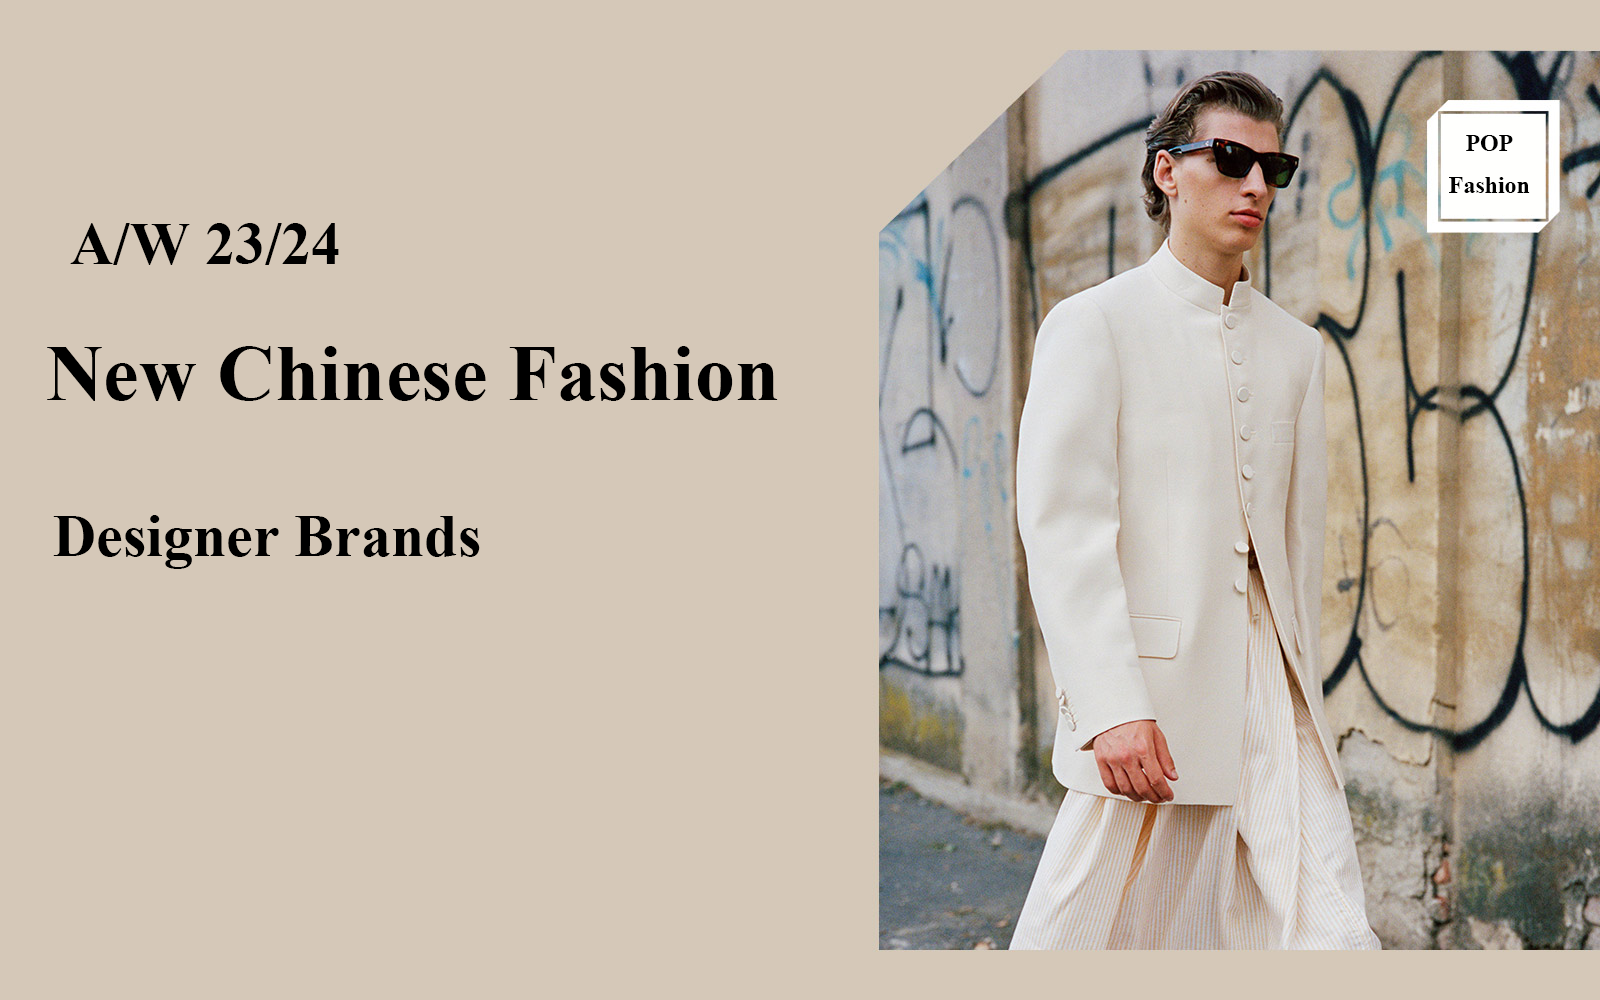 New Chinese Fashion -- The Comprehensive Analysis of Menswear Designer Brand